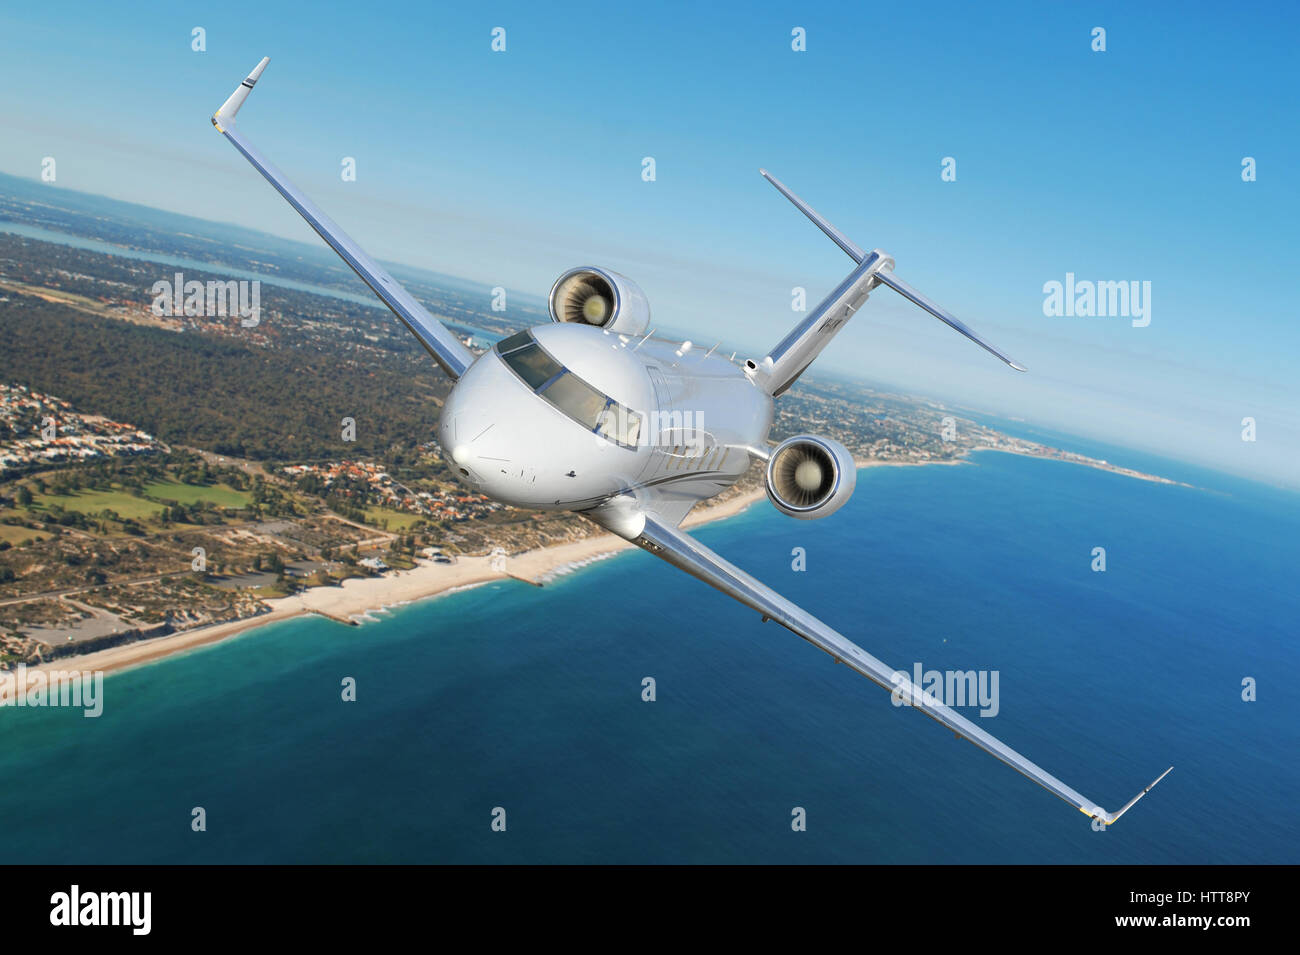 Air-to-air shot of a Bombardier Challenger CL604, twin engine business jet, flying above beach. Stock Photo